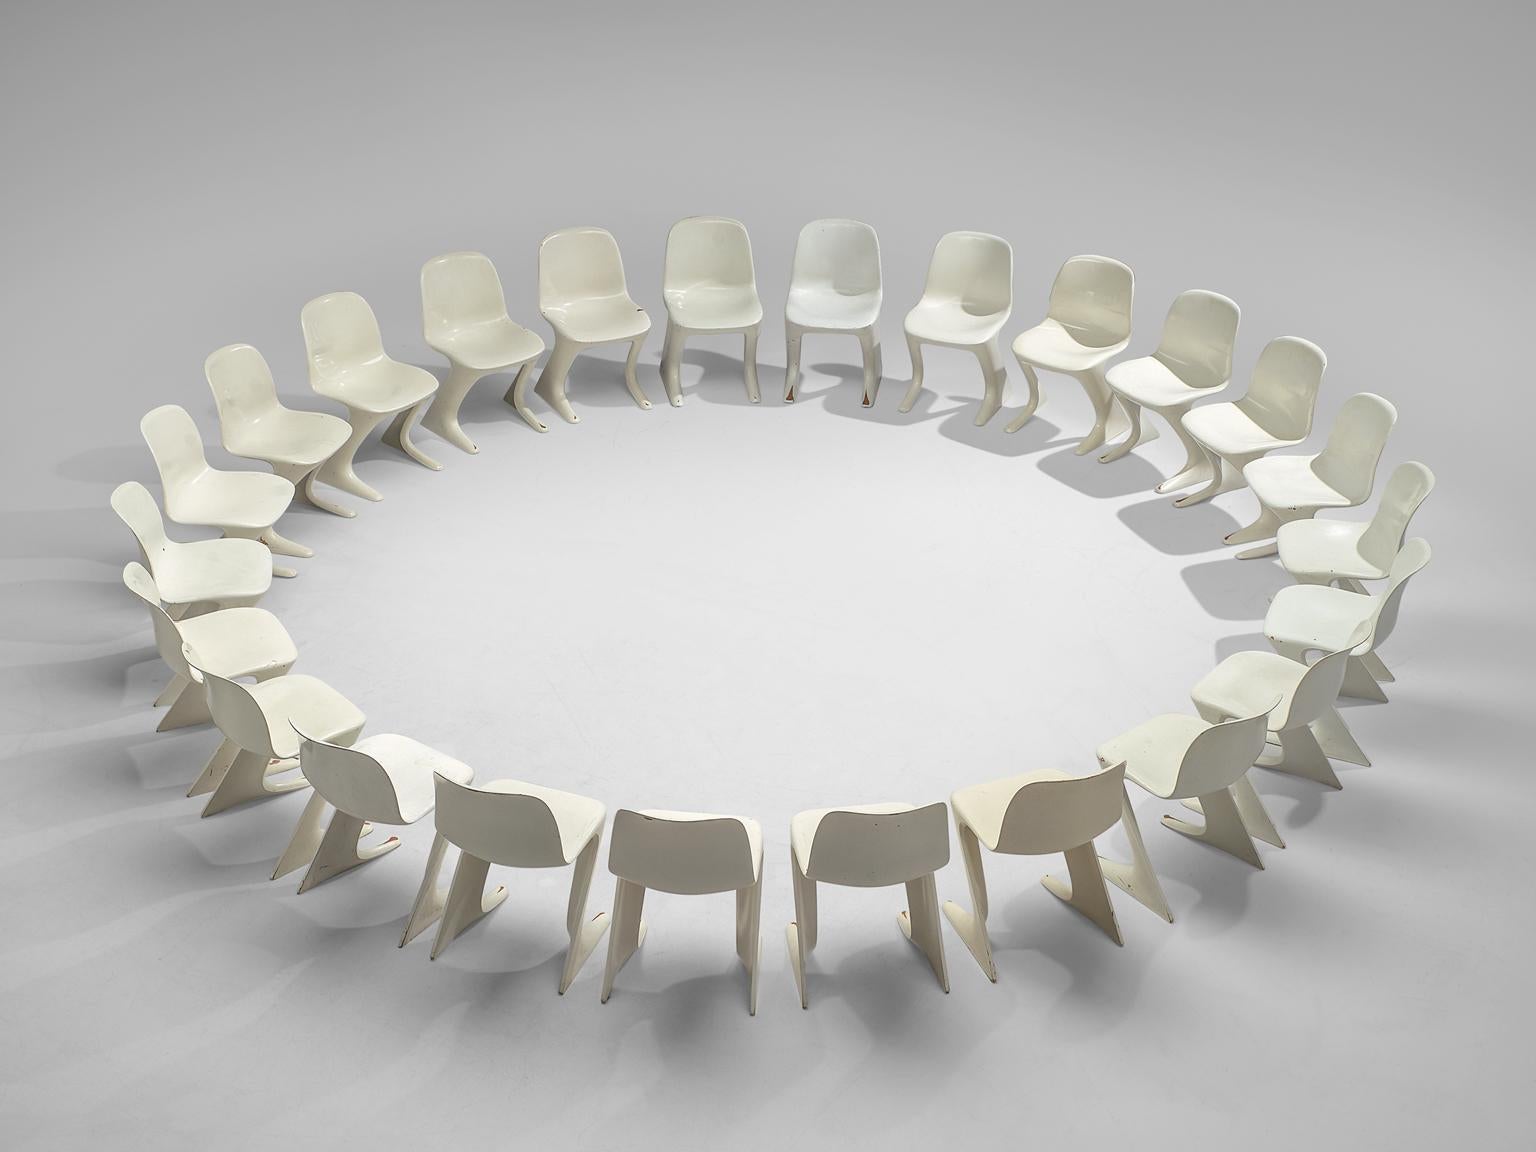 Ernst Moeckl for Trabant, Set of 24 'Z' chairs, fiberglass, Germany, 1968

This set of white Kangaroo chairs is designed by Ernste Moeckl in 1968. The chair is also called the Z-chair, referring to its shape. During the period of the Iron Curtain,